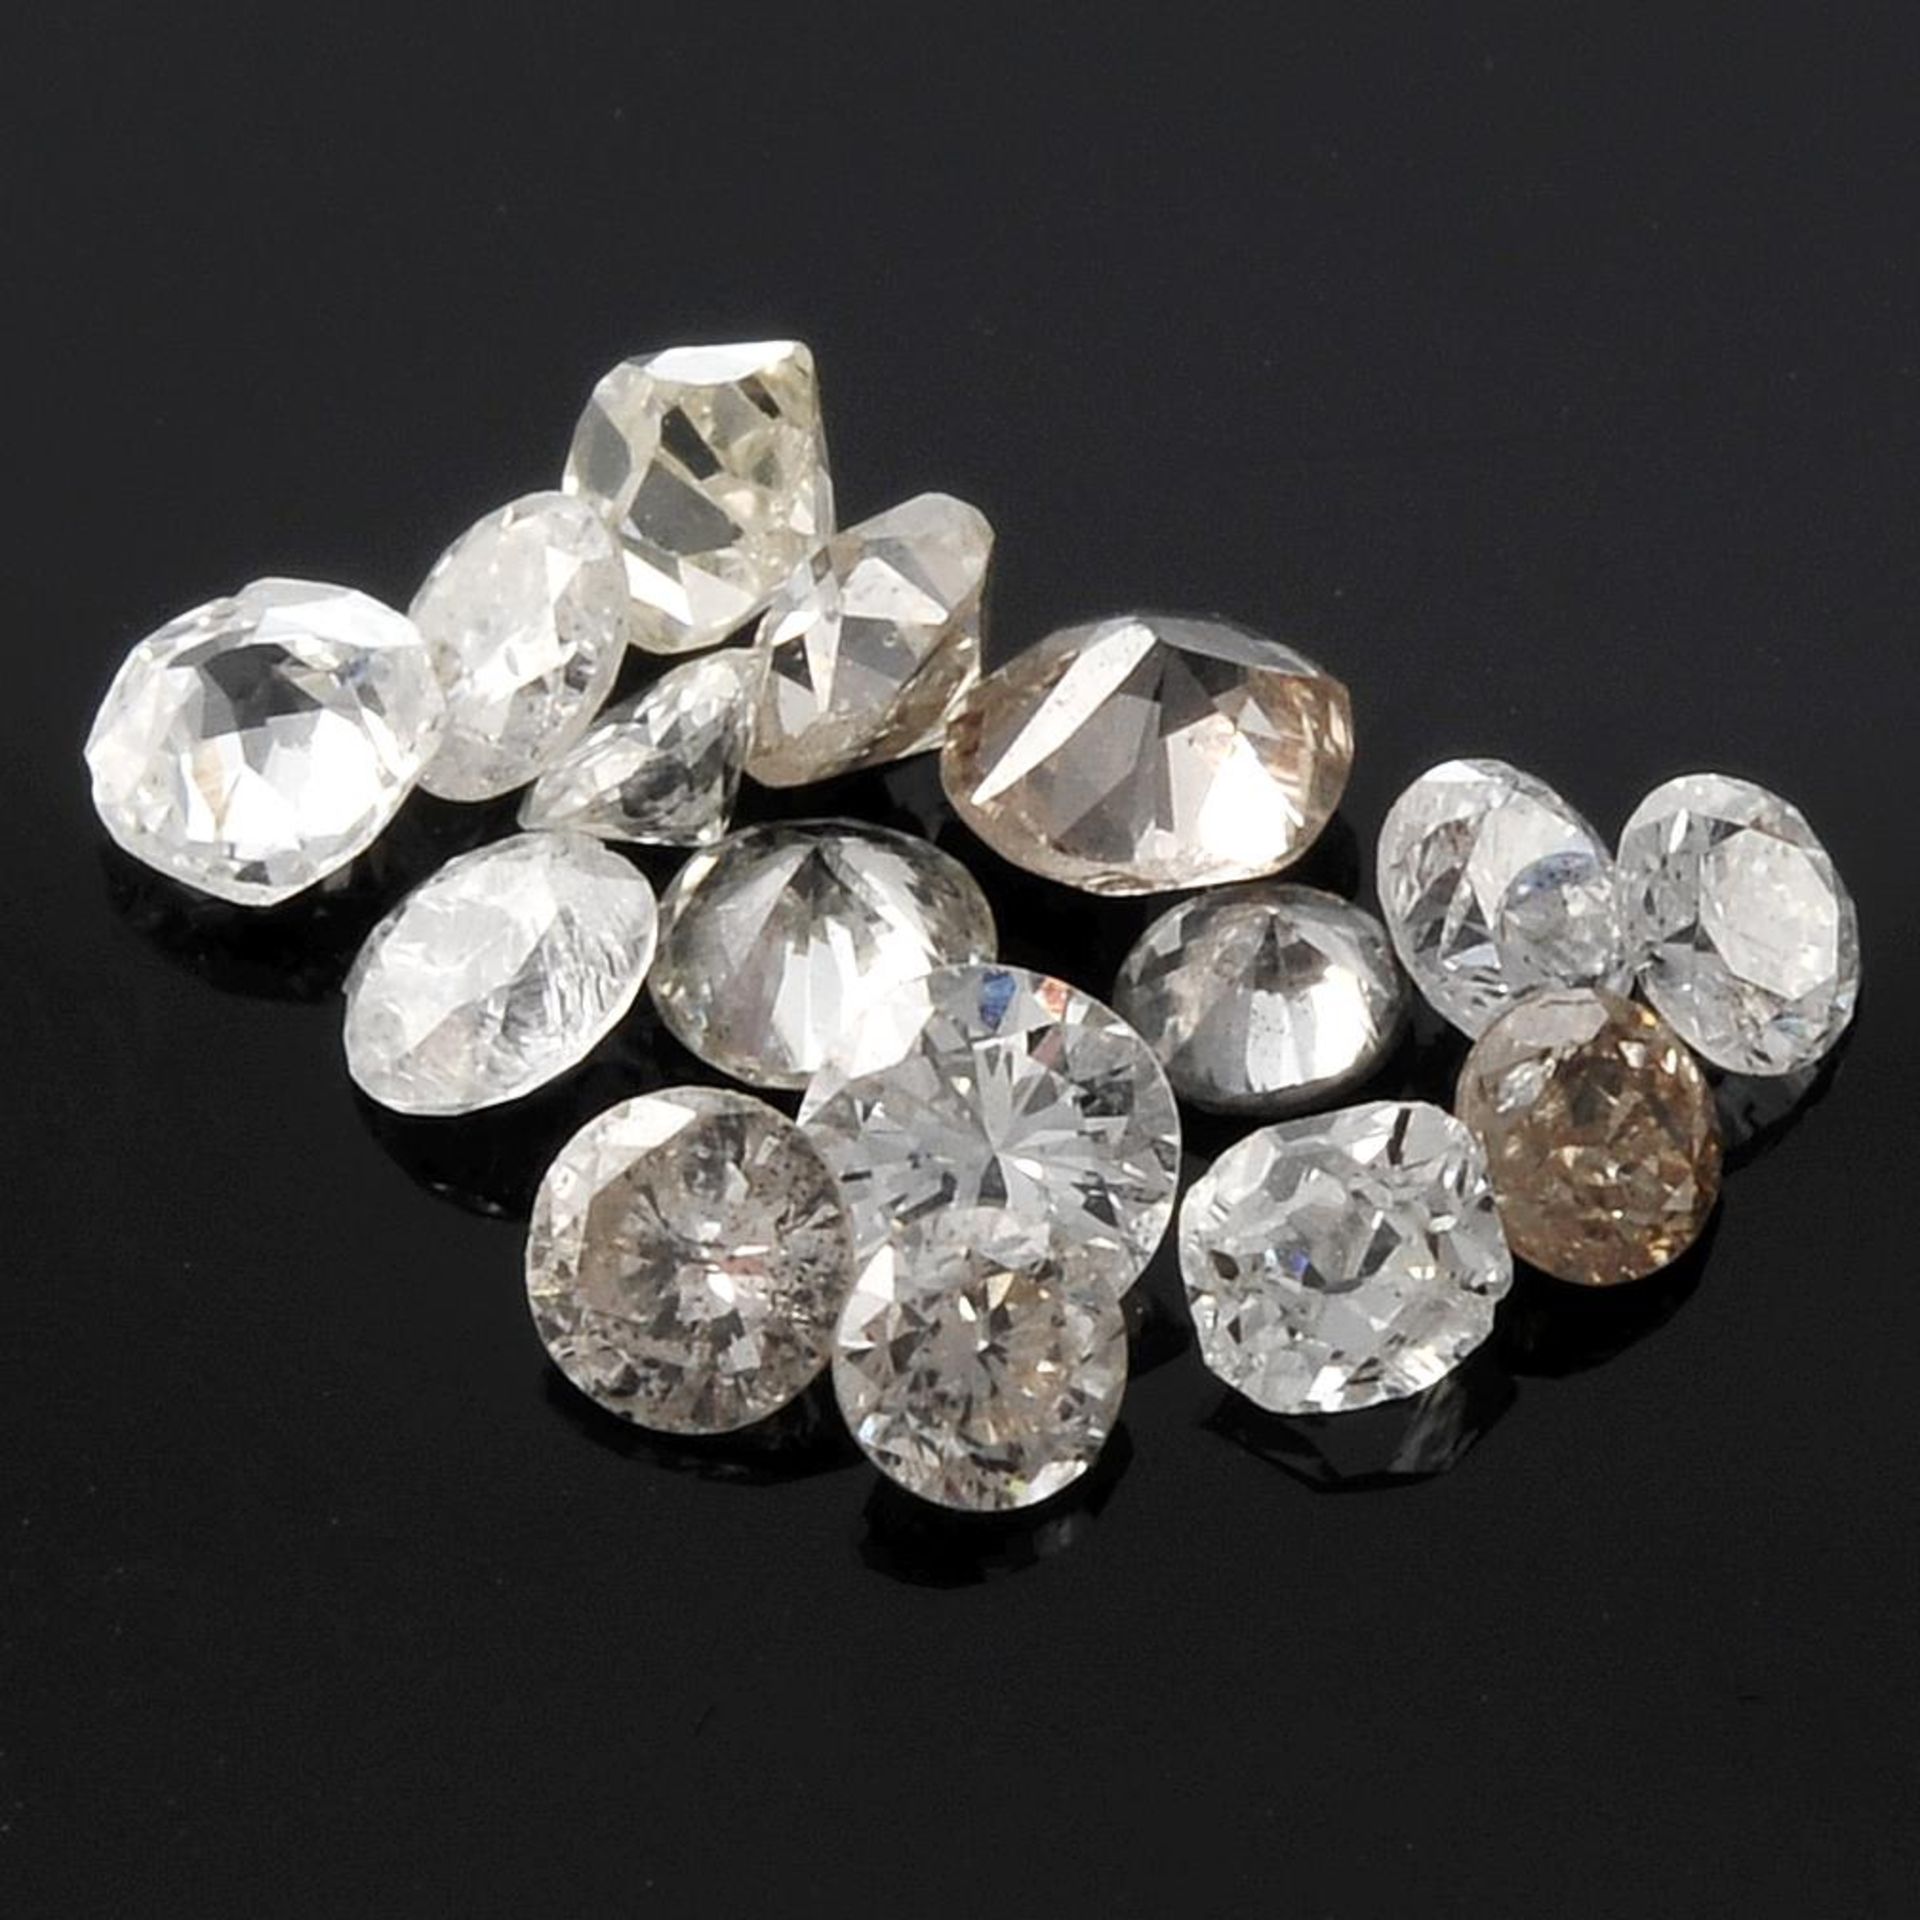 Selection of brilliant cut diamonds, weighing 3ct.